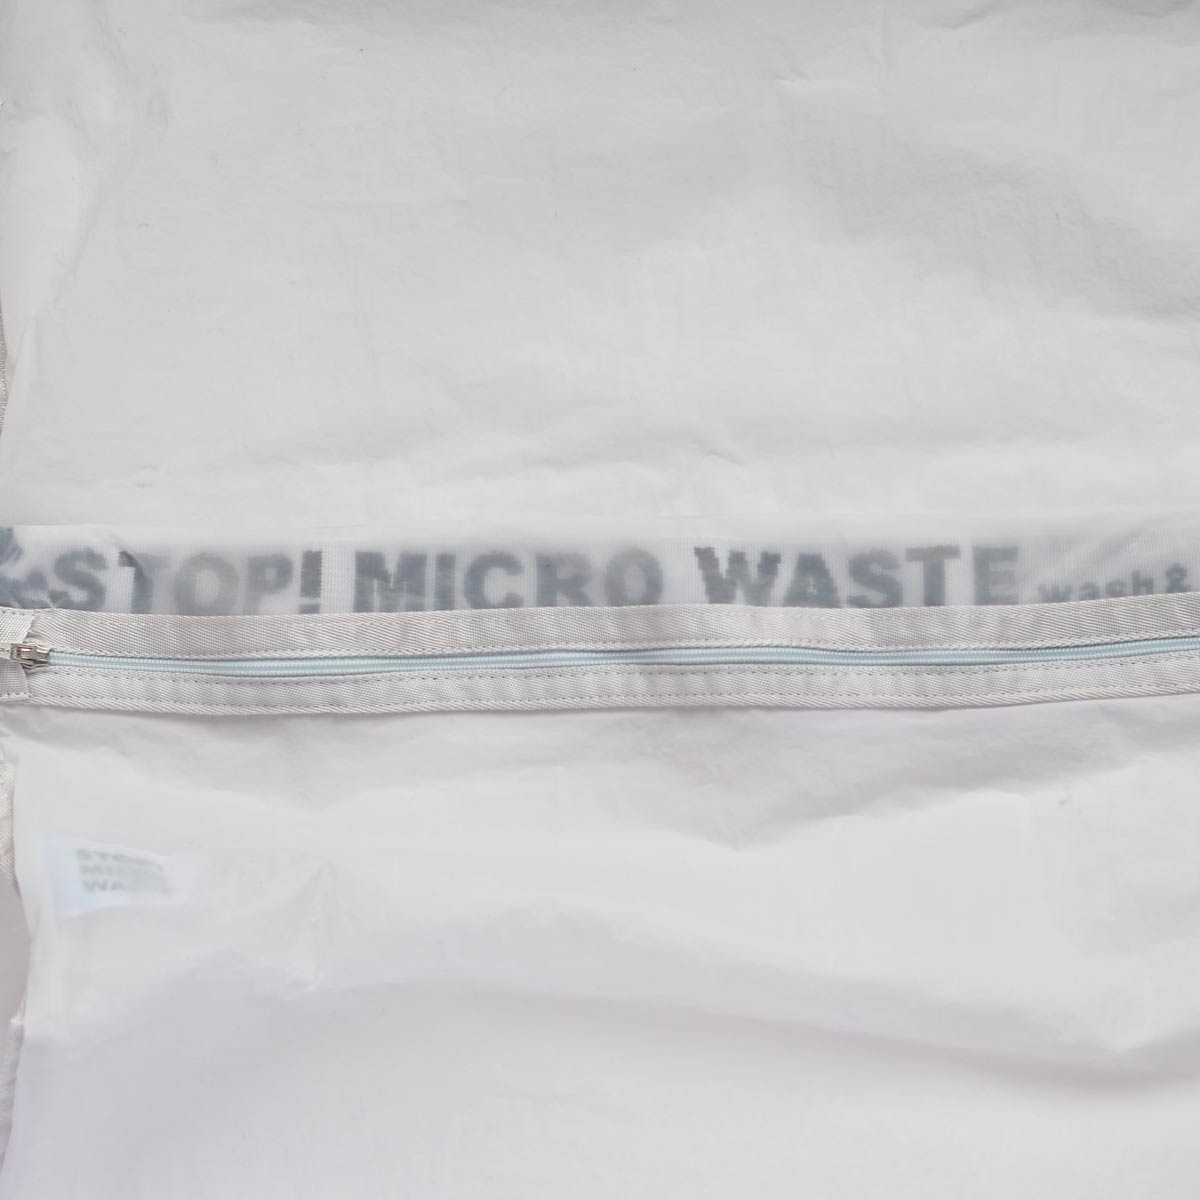 I Tried the Microfiber-Catching Guppyfriend Washing Bag - Welcome Objects